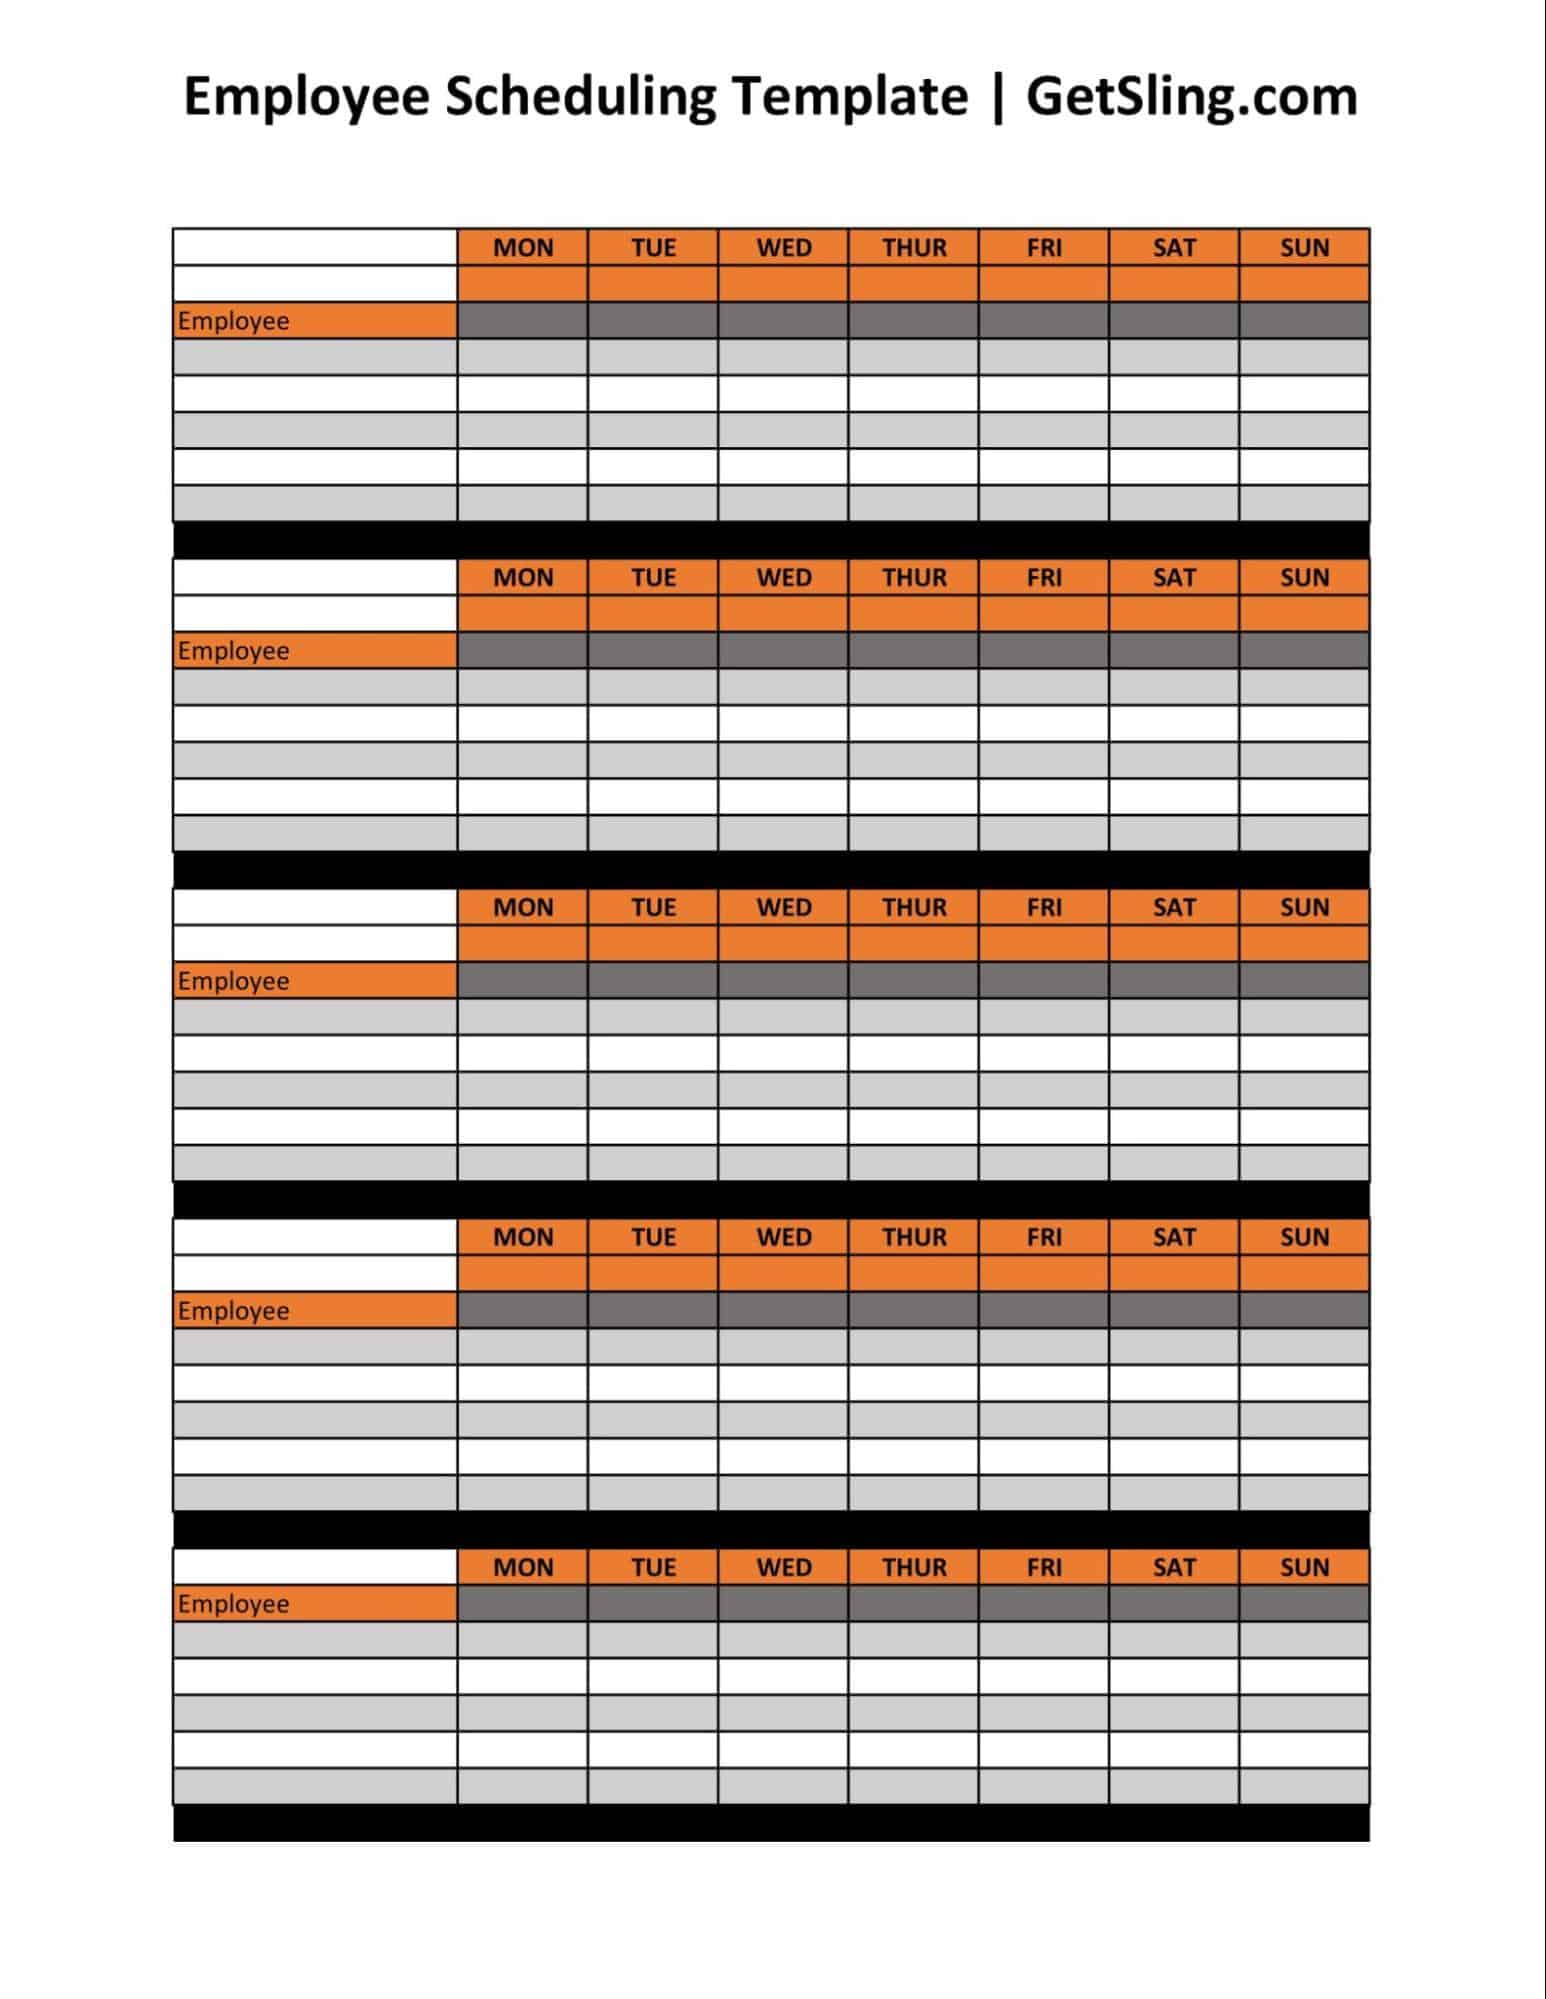 Employee Scheduling Template from Getsling.com